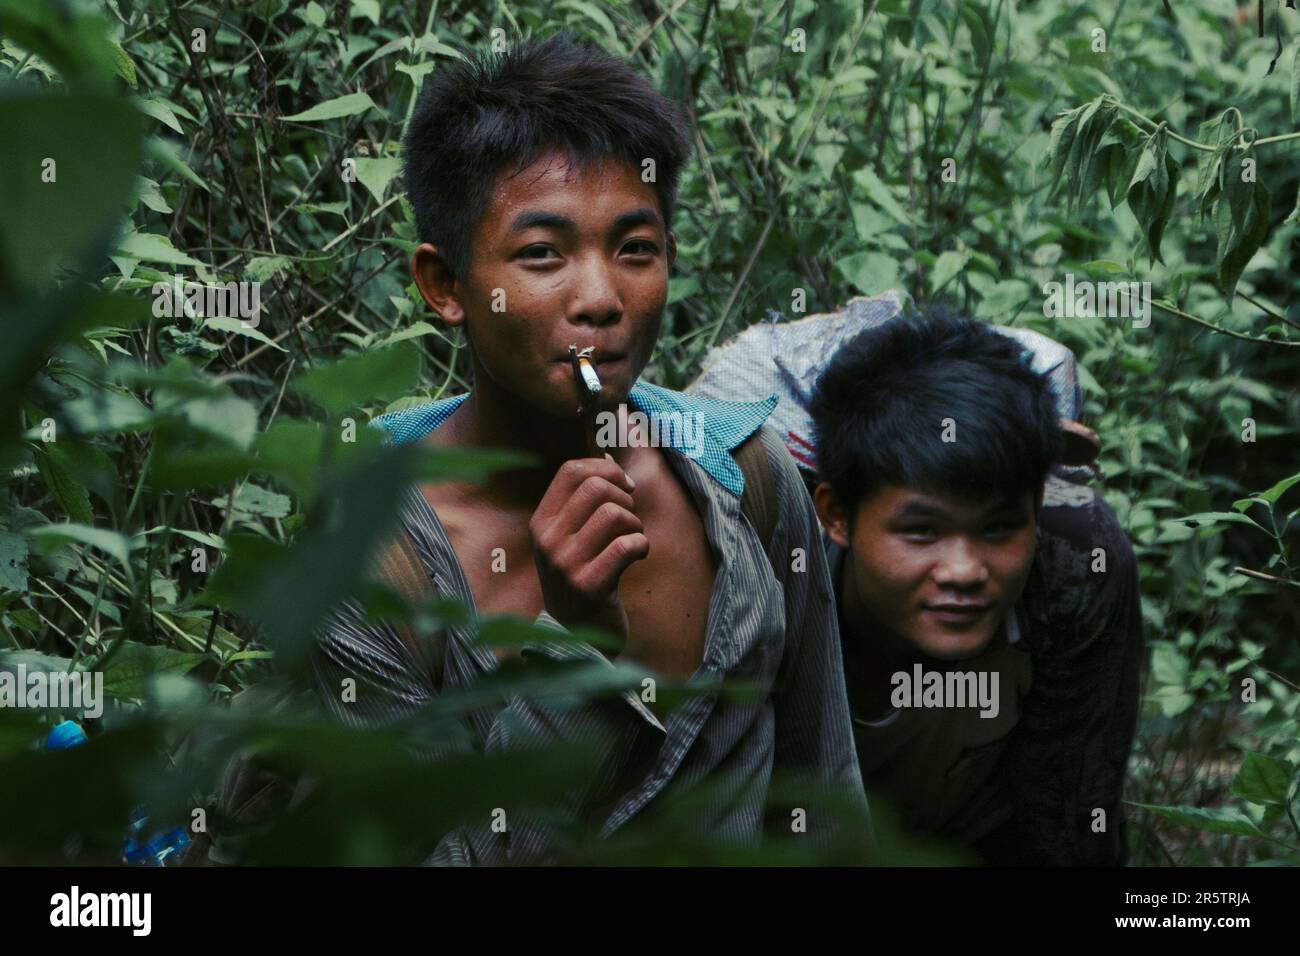 Two young boys, friends, living in the moment, enjoying a cigarette, while being engulged and framed by the wild jungle. Stock Photo